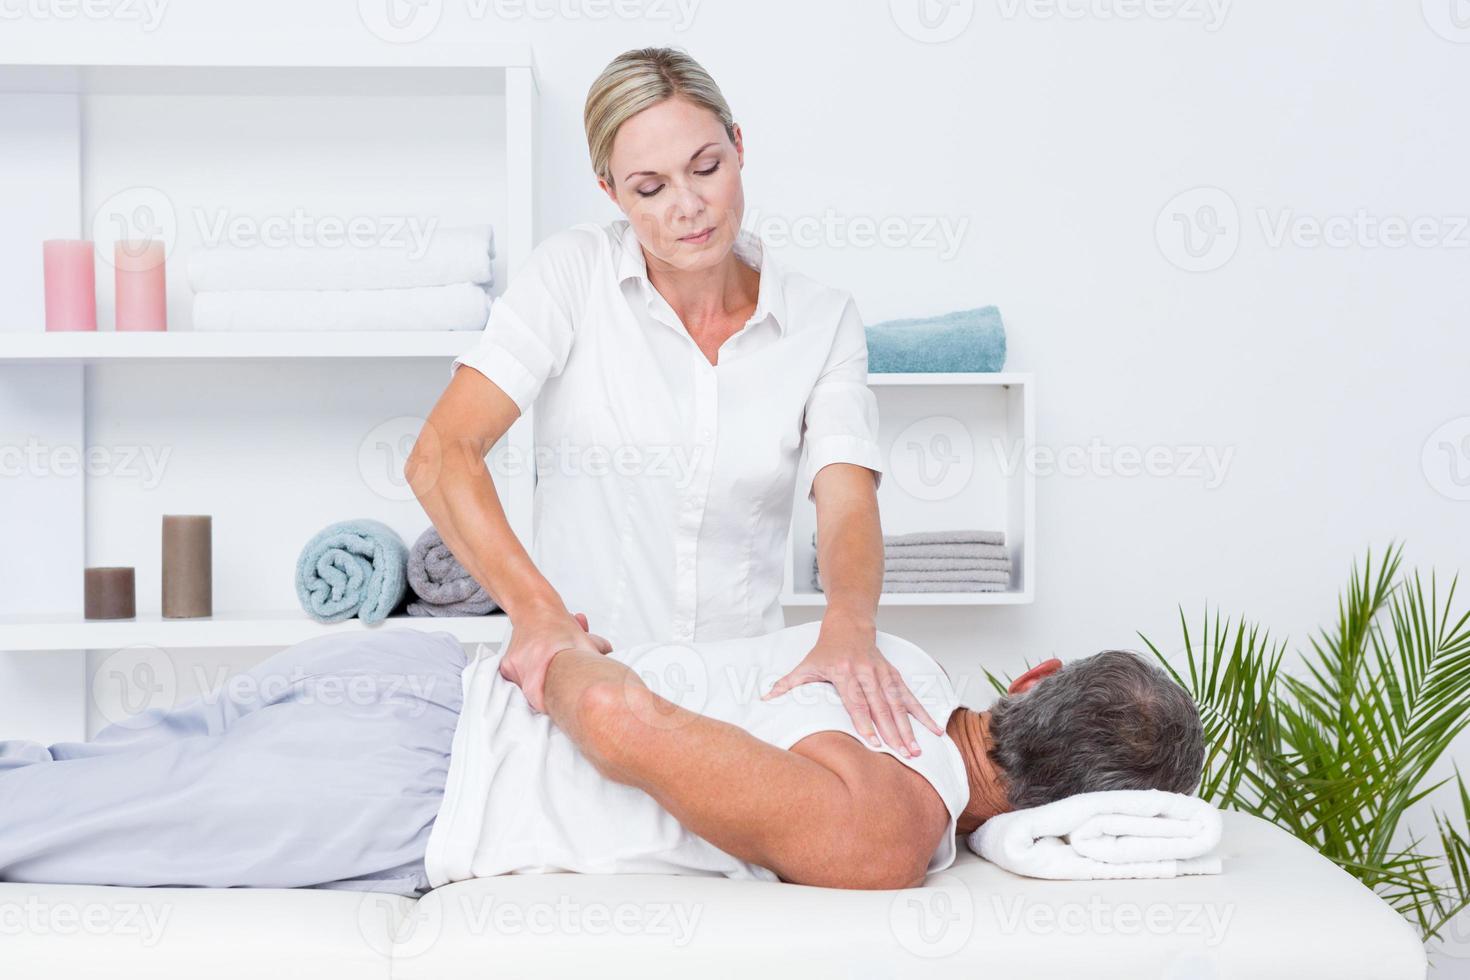 Physiotherapist doing shoulder massage to her patient photo